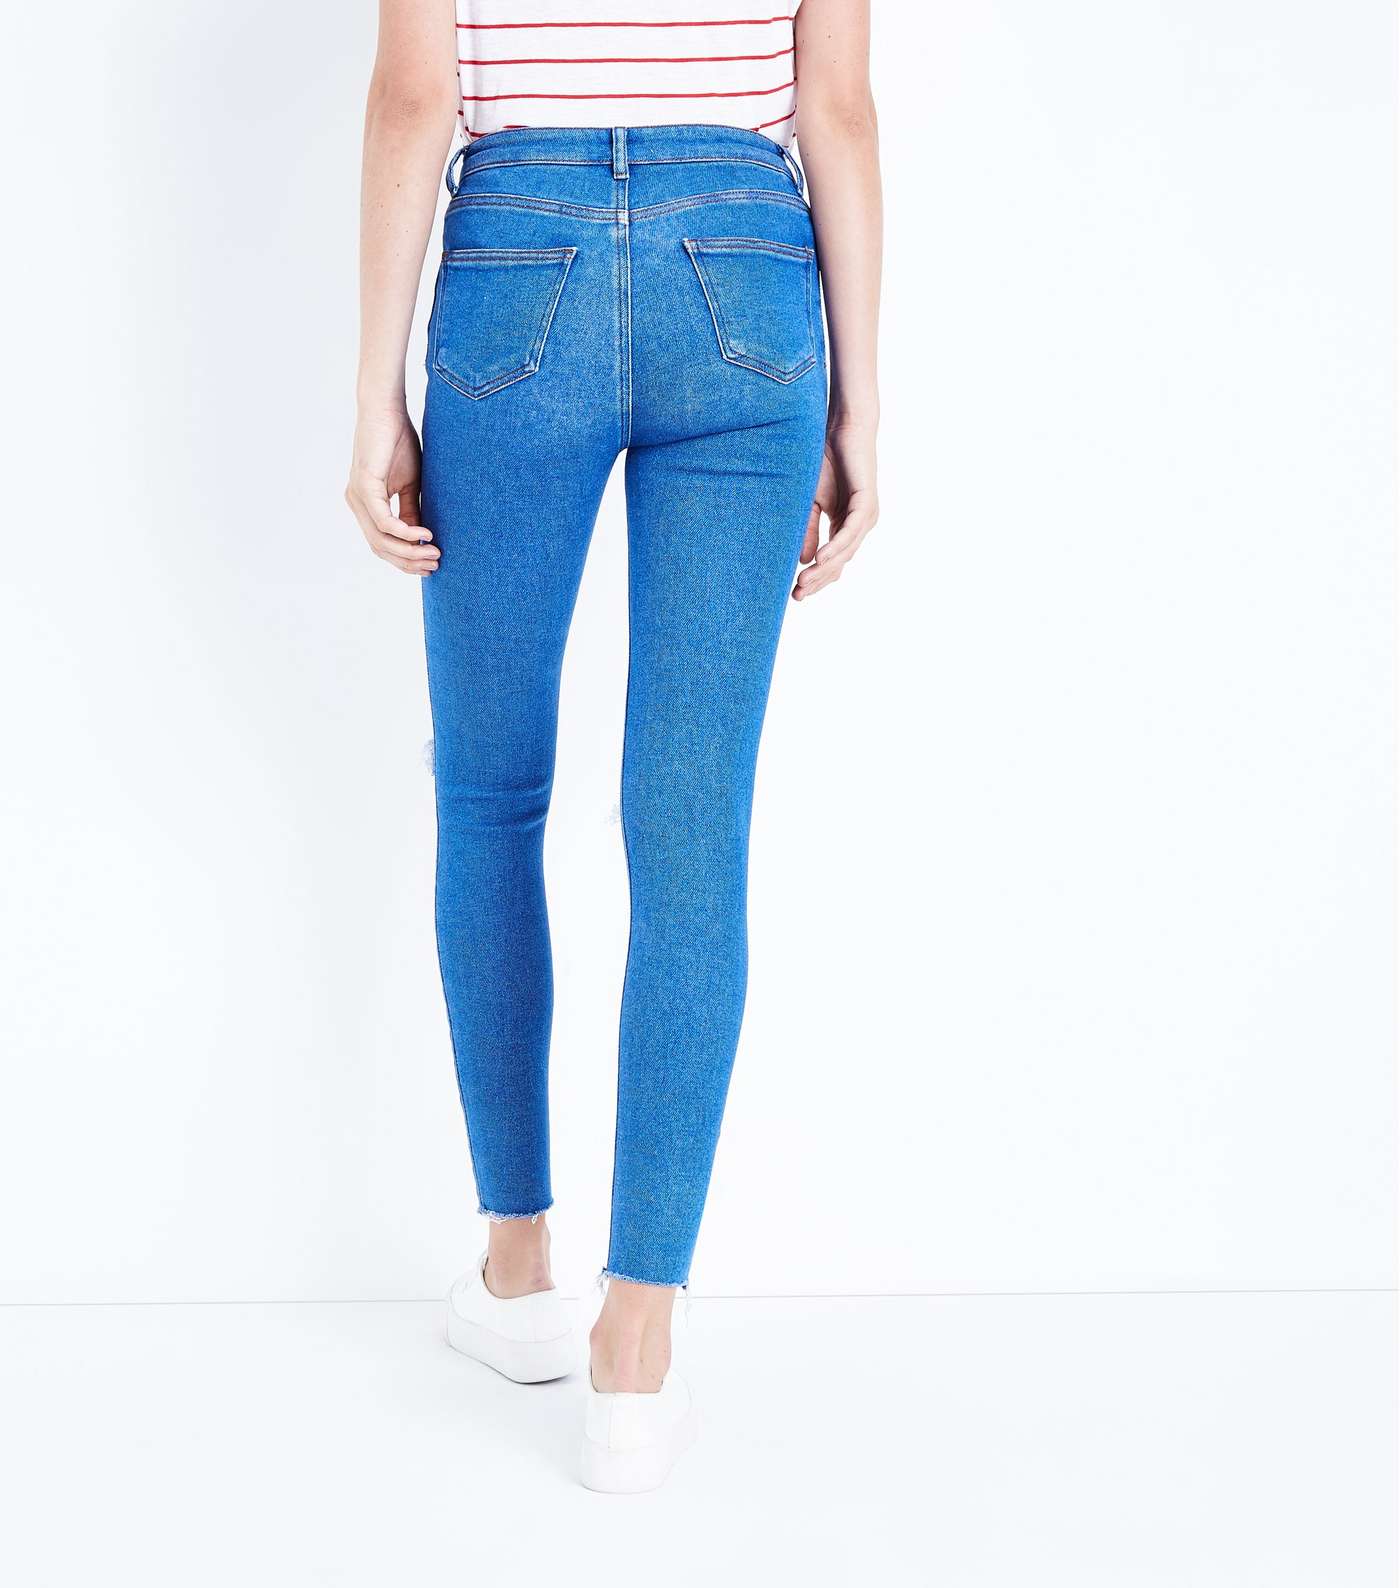 Bright Blue Ripped High Waist Super Skinny Hallie Jeans Image 3